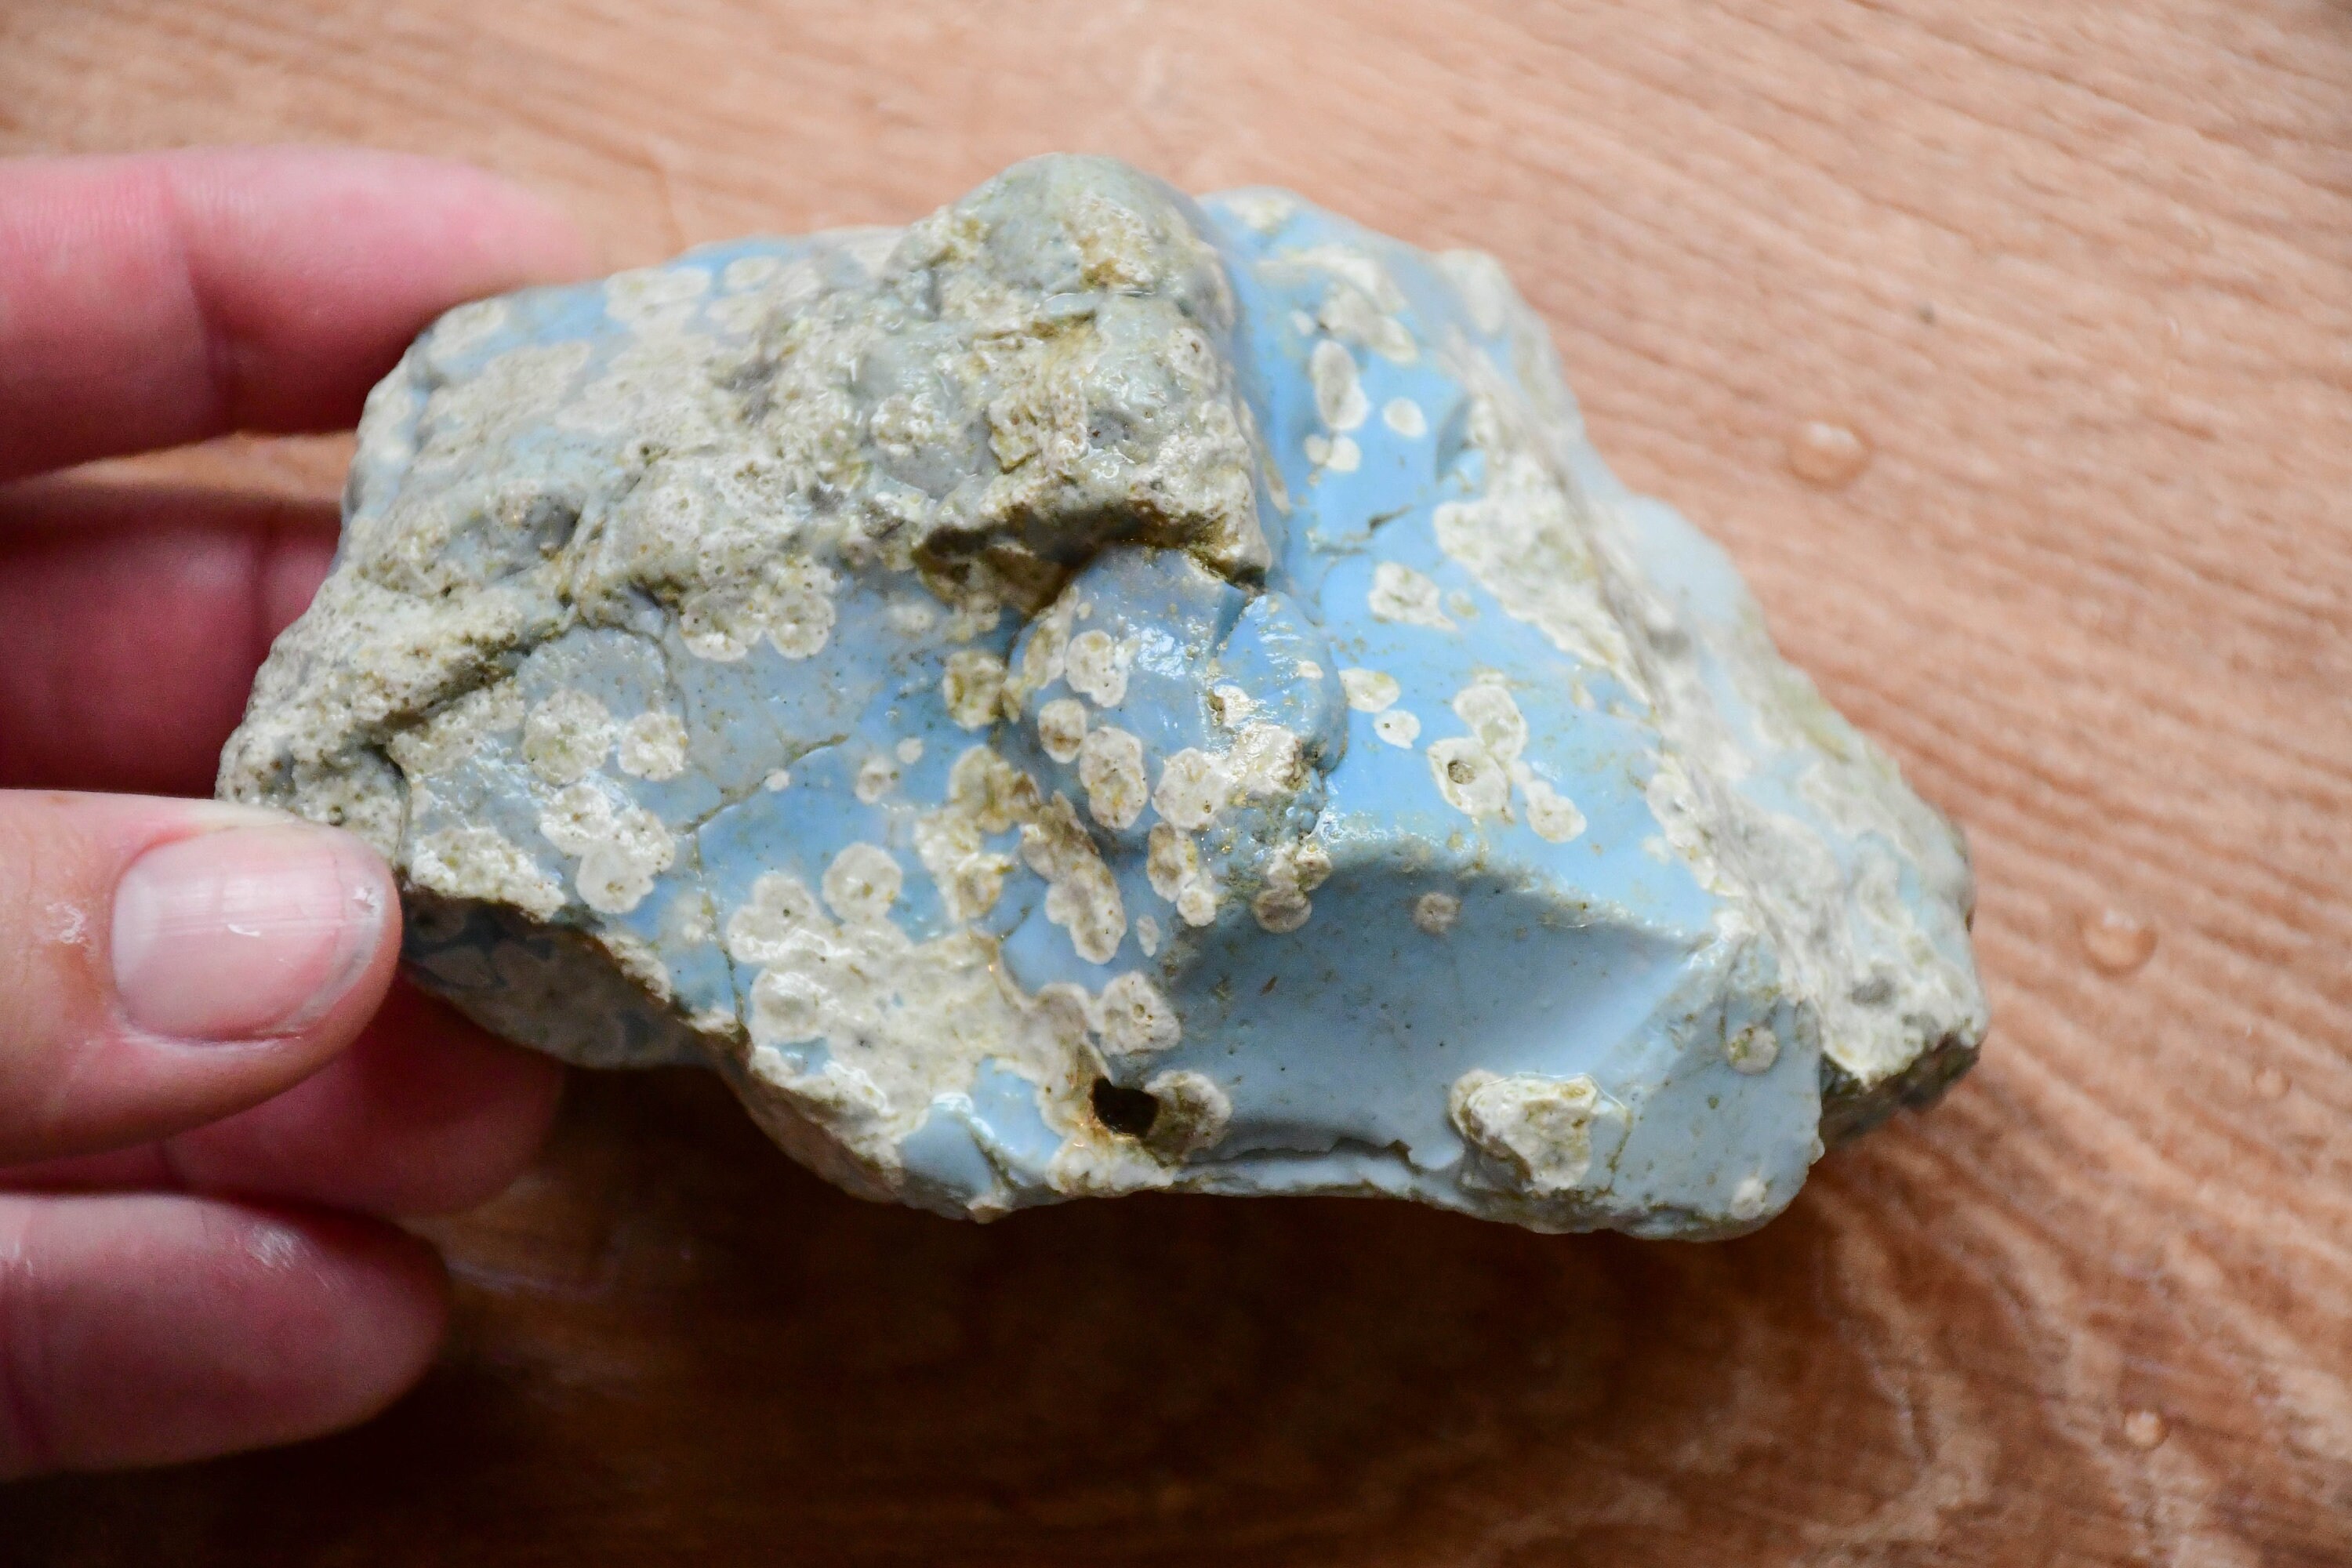 How to look for Leland Blue stone, a Michigan rock hunting treasure 